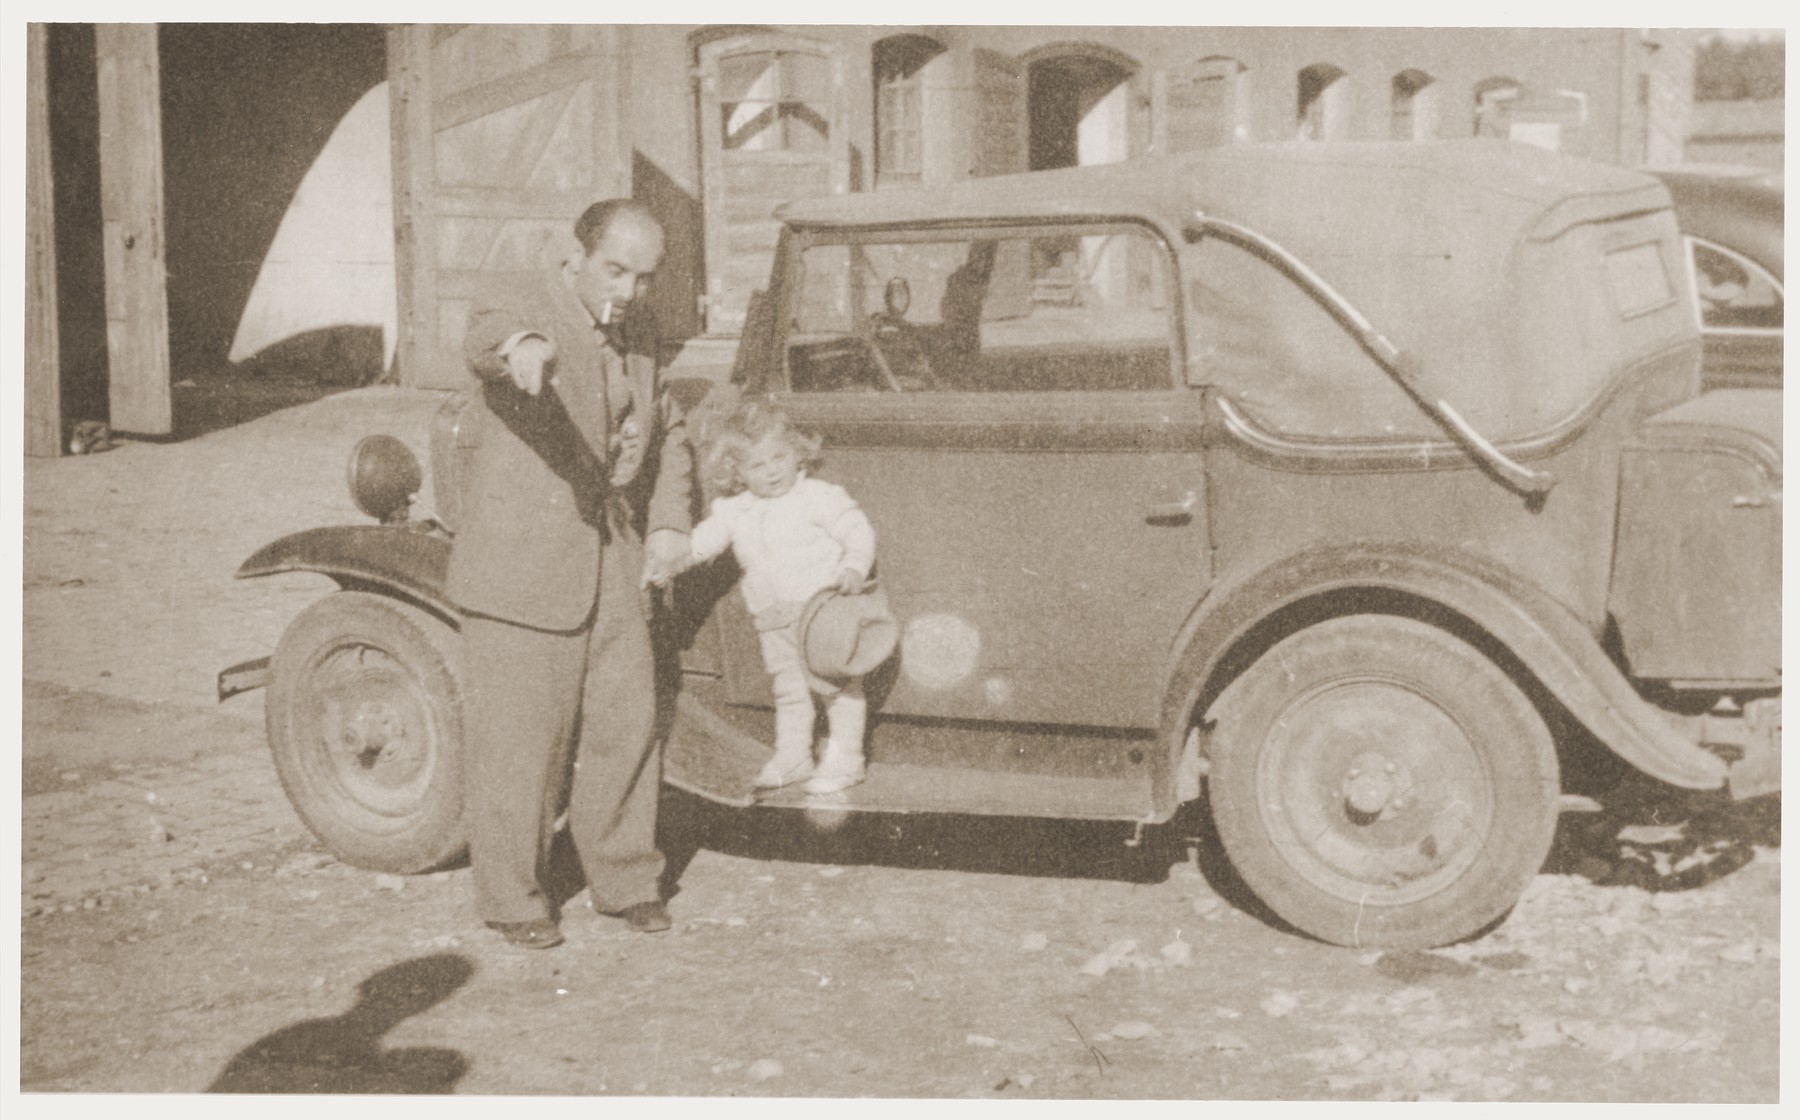 A little girl poses on the running board of a car while holding her father's hand at the Kibbutz Nili hachshara (Zionist collective) in Pleikershof, Germany.  

Pictured are Noach Miedzinski and his daughter Nili Ruchana.